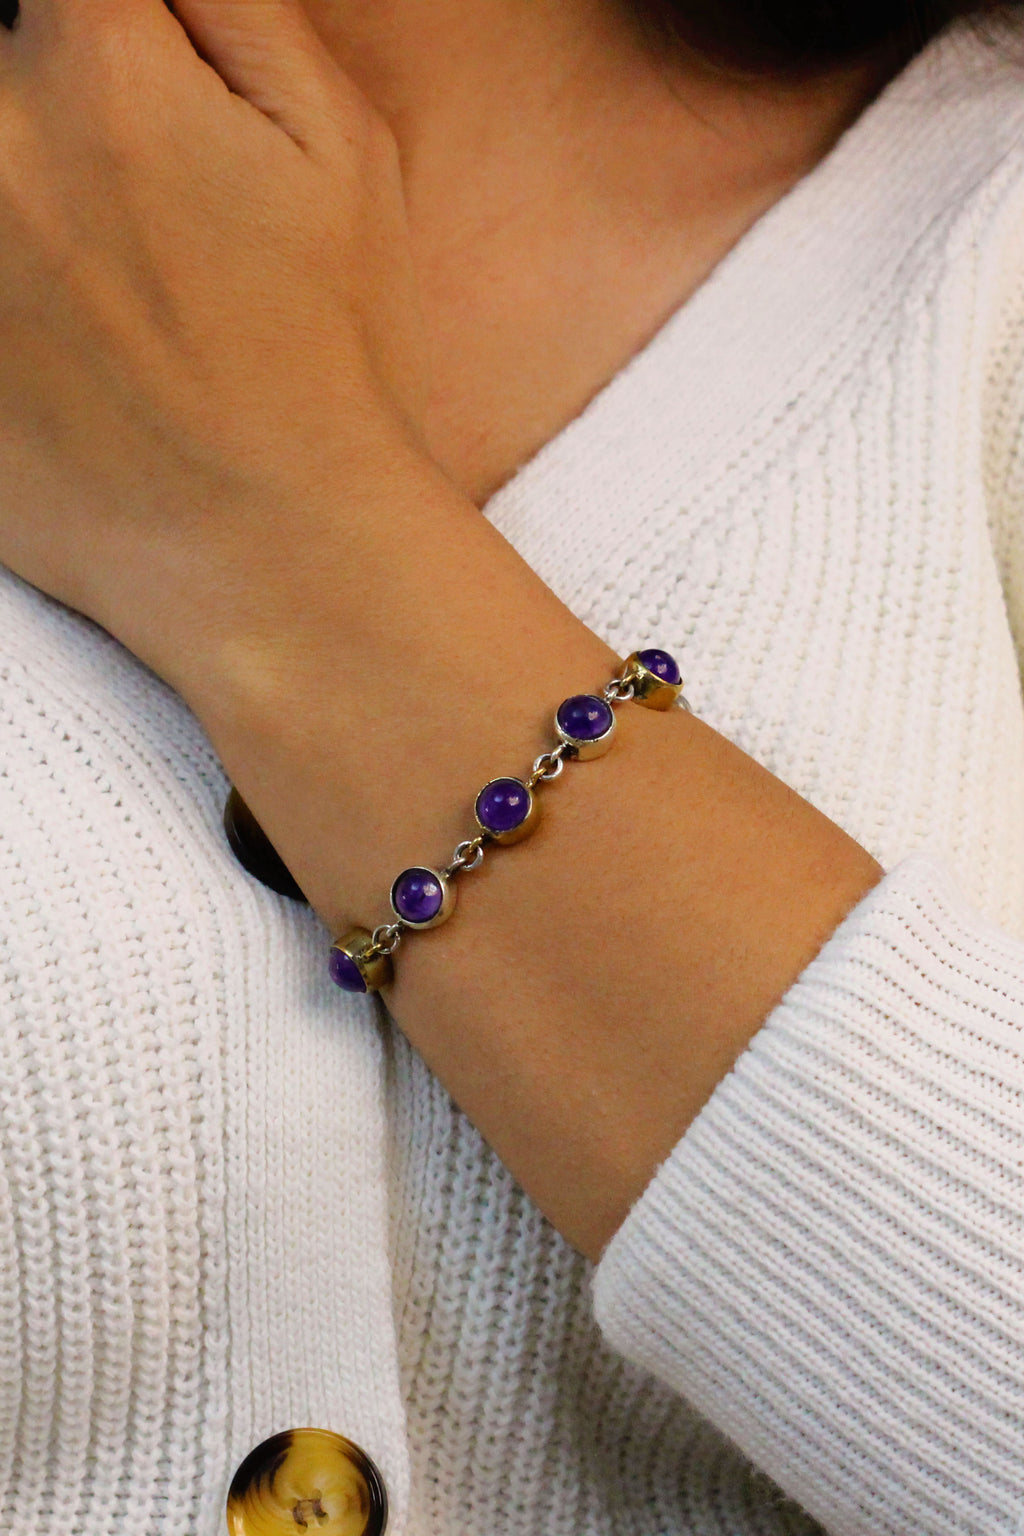 Authentic Handmade Sterling Silver Bracelet With Amethyst (NG201015738)